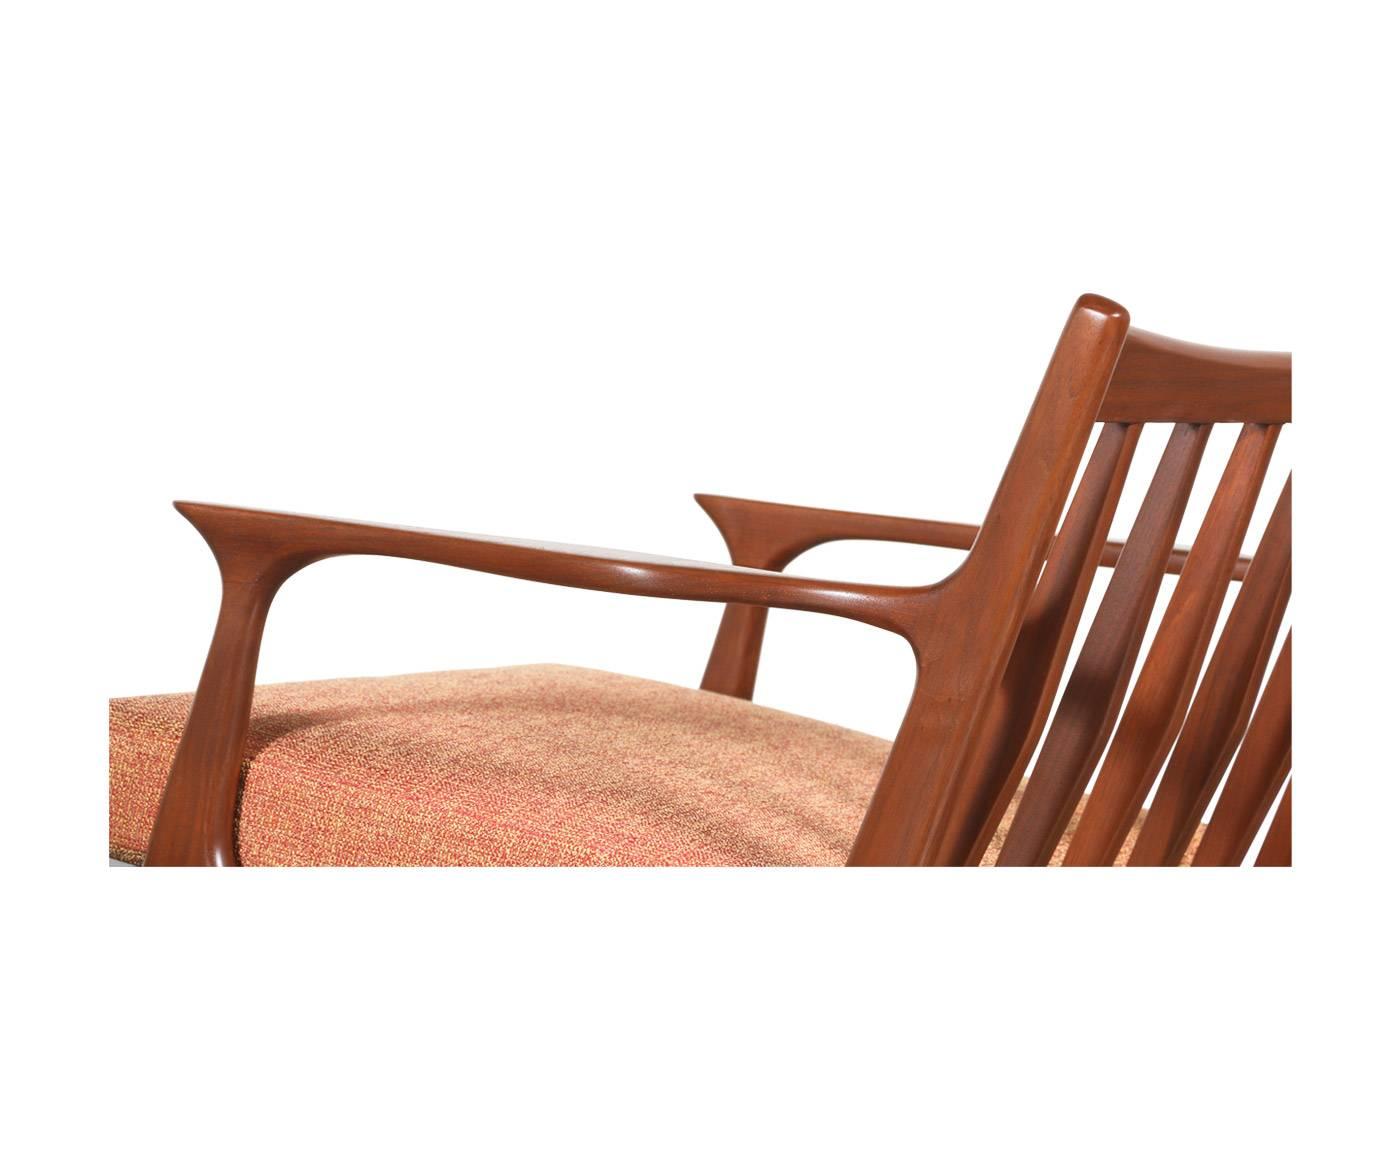 American Pair of Mid-Century Sculpted Walnut Lounge Chairs